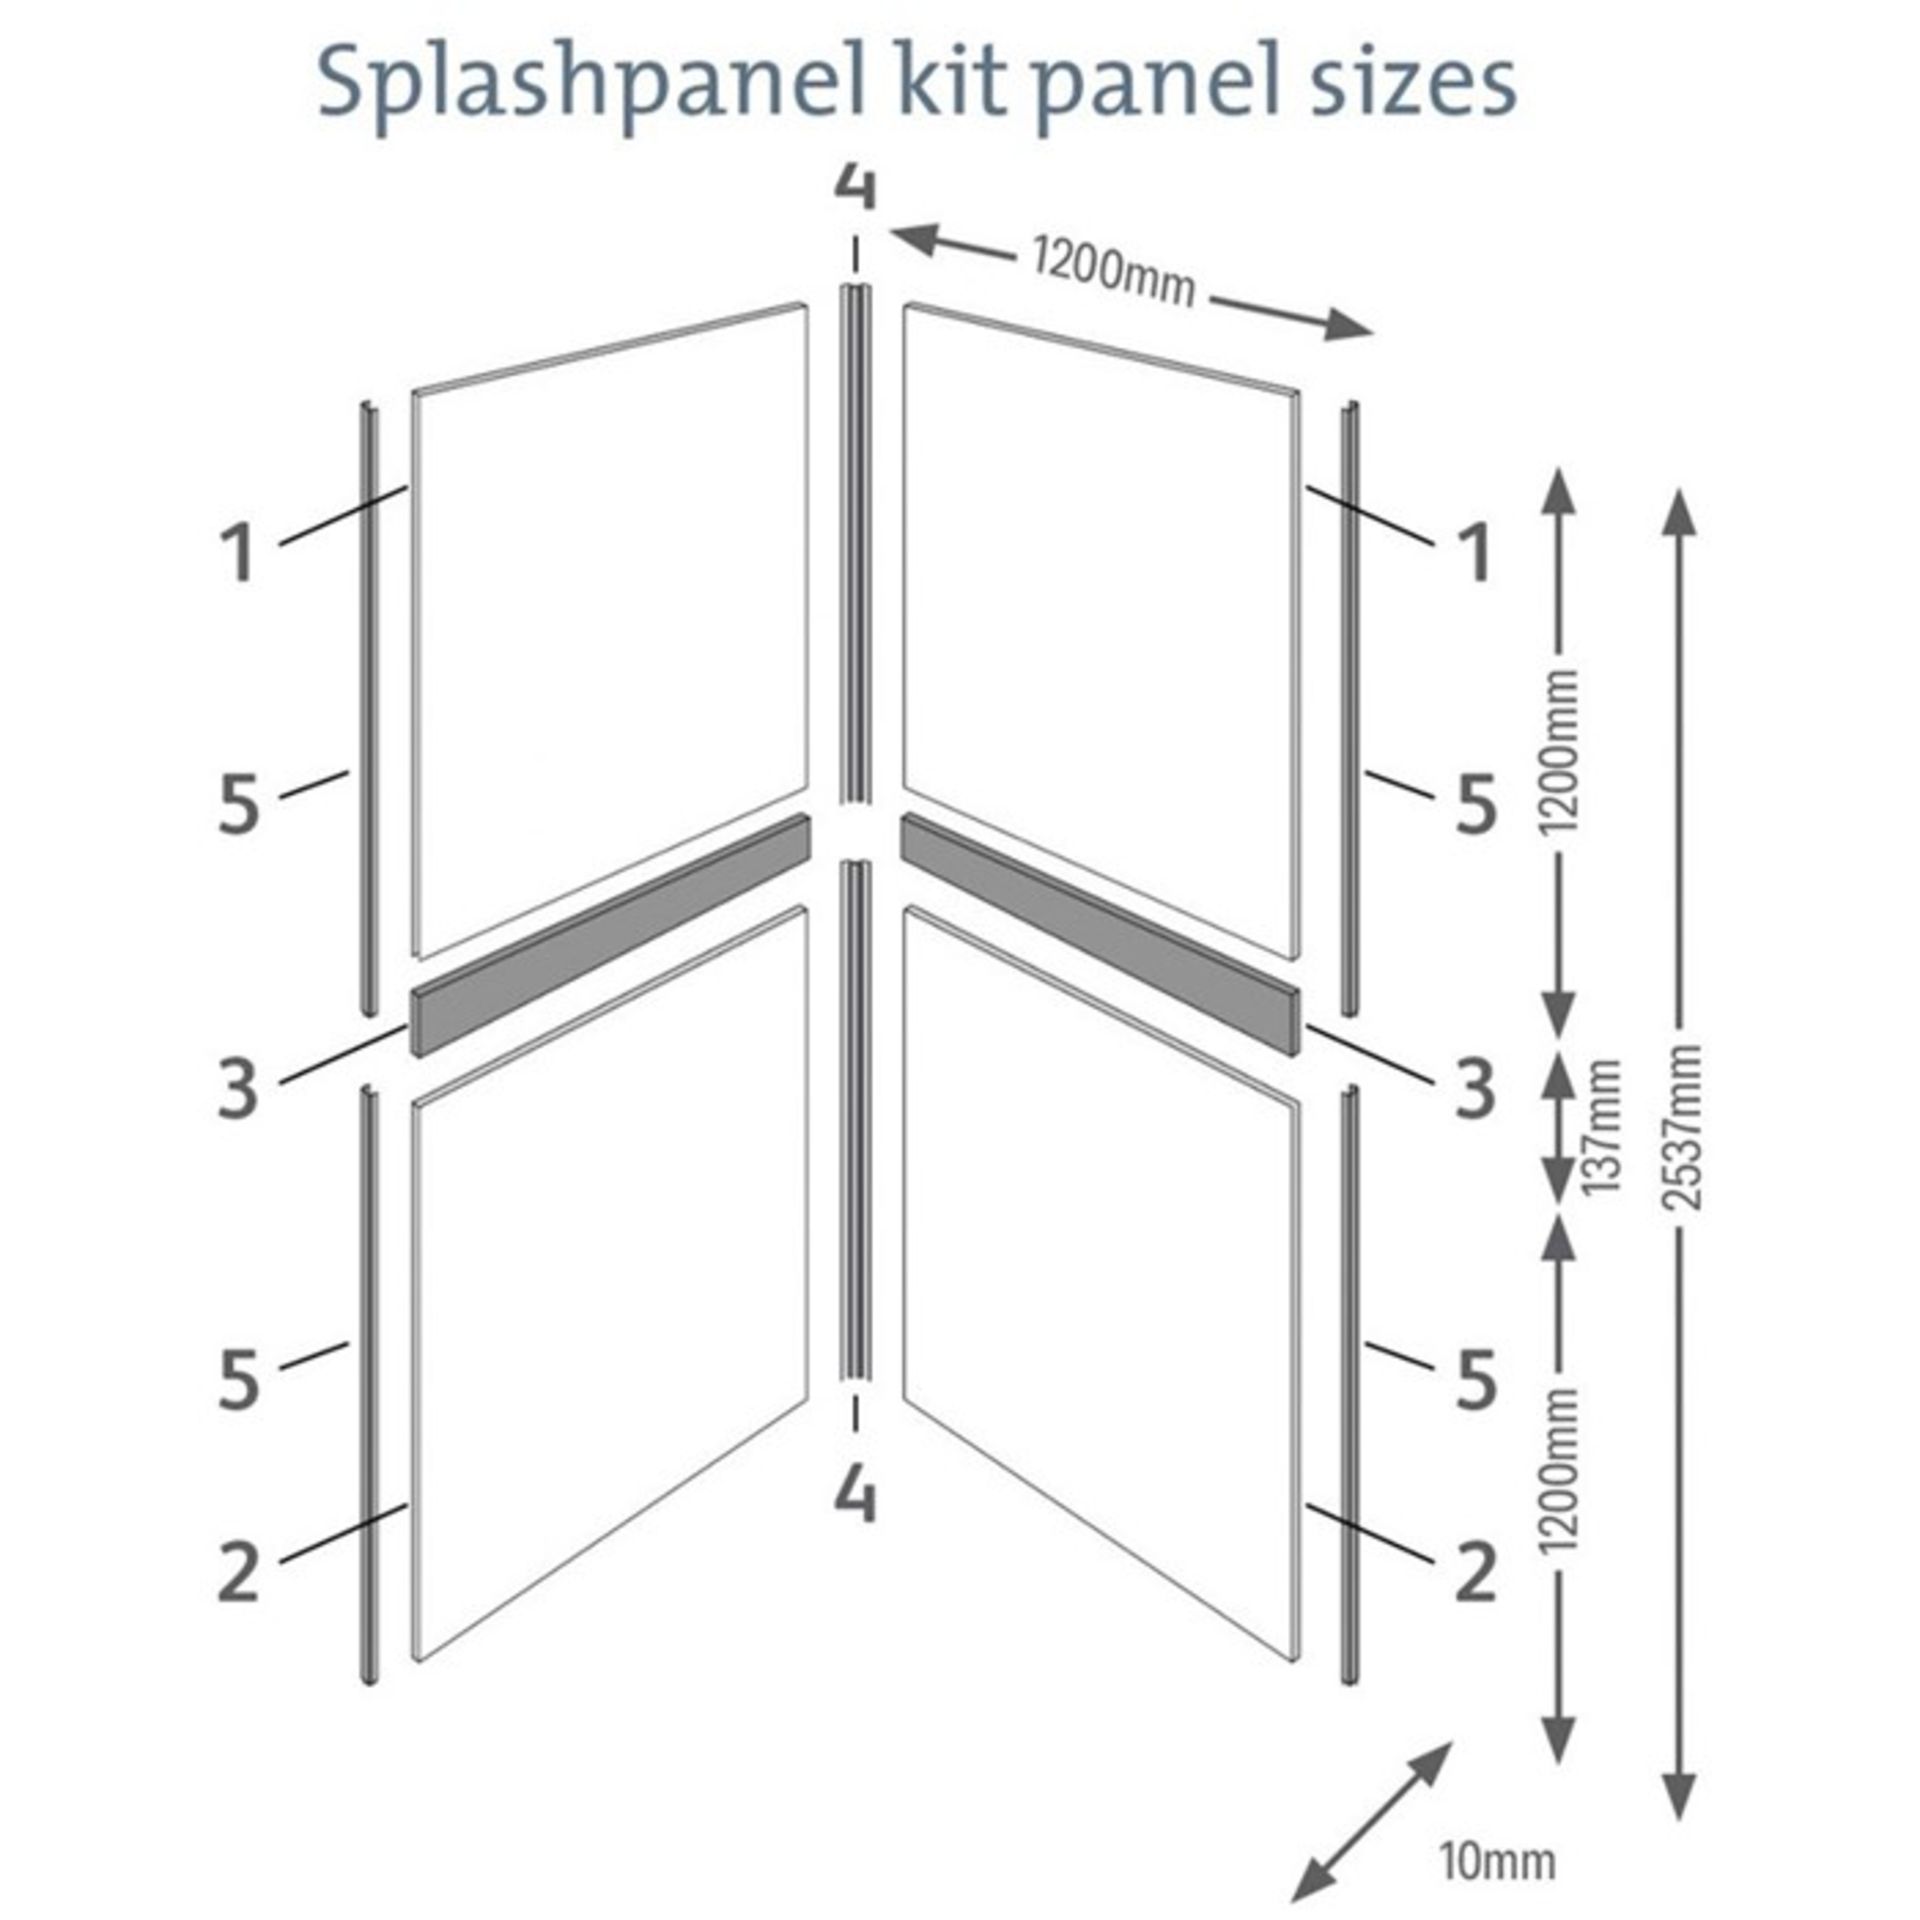 12x Splash Panel 2 sided shower wall kit in Sandstone, new and boxed, each kit contains 2 - Image 3 of 3